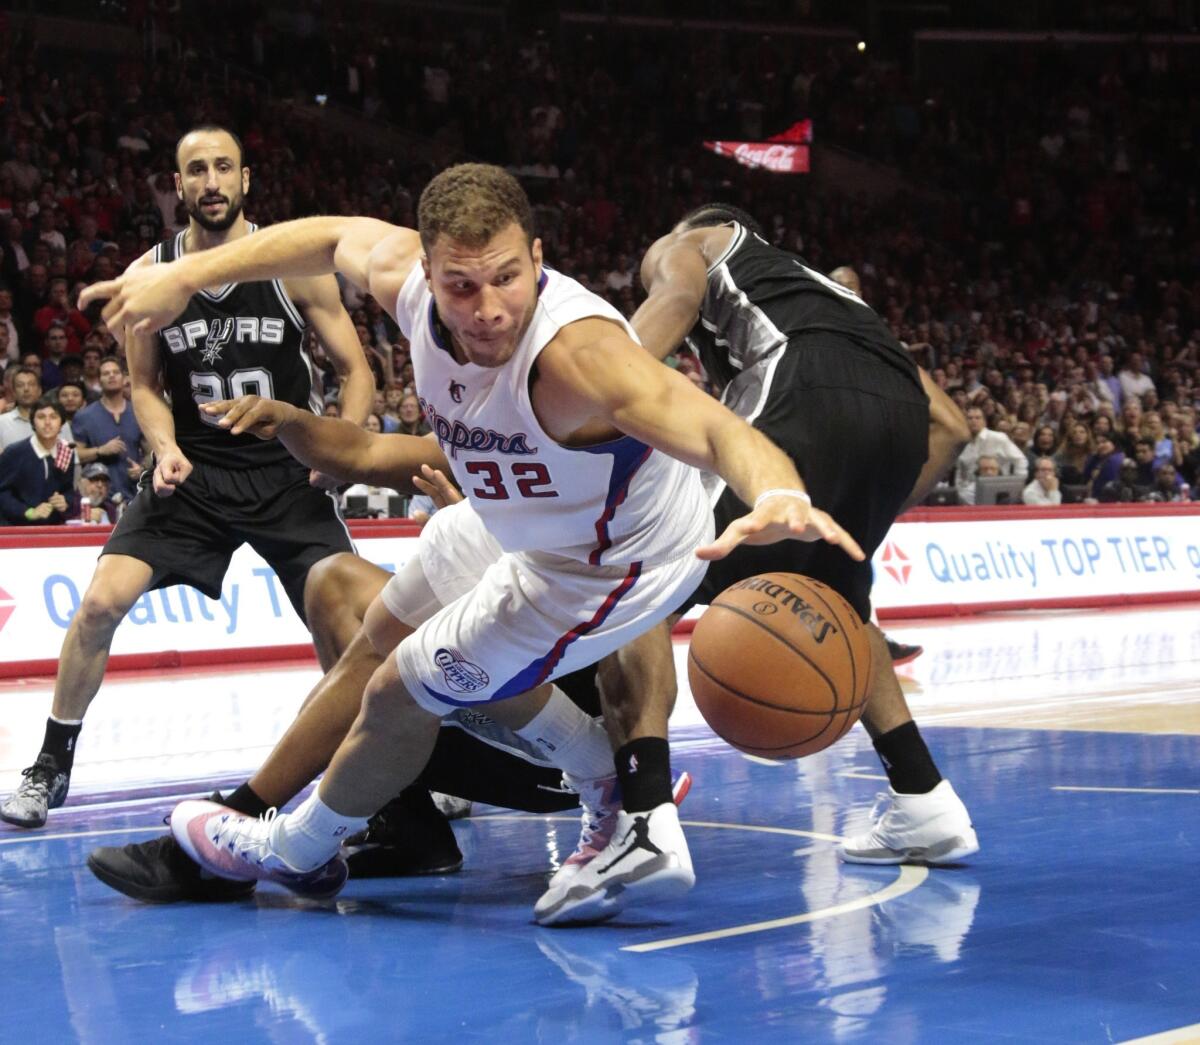 Clippers power forward Blake Griffin, scrambling for a rebound in the final moments of a game against the Spurs, says he will address his court case when the time is right.